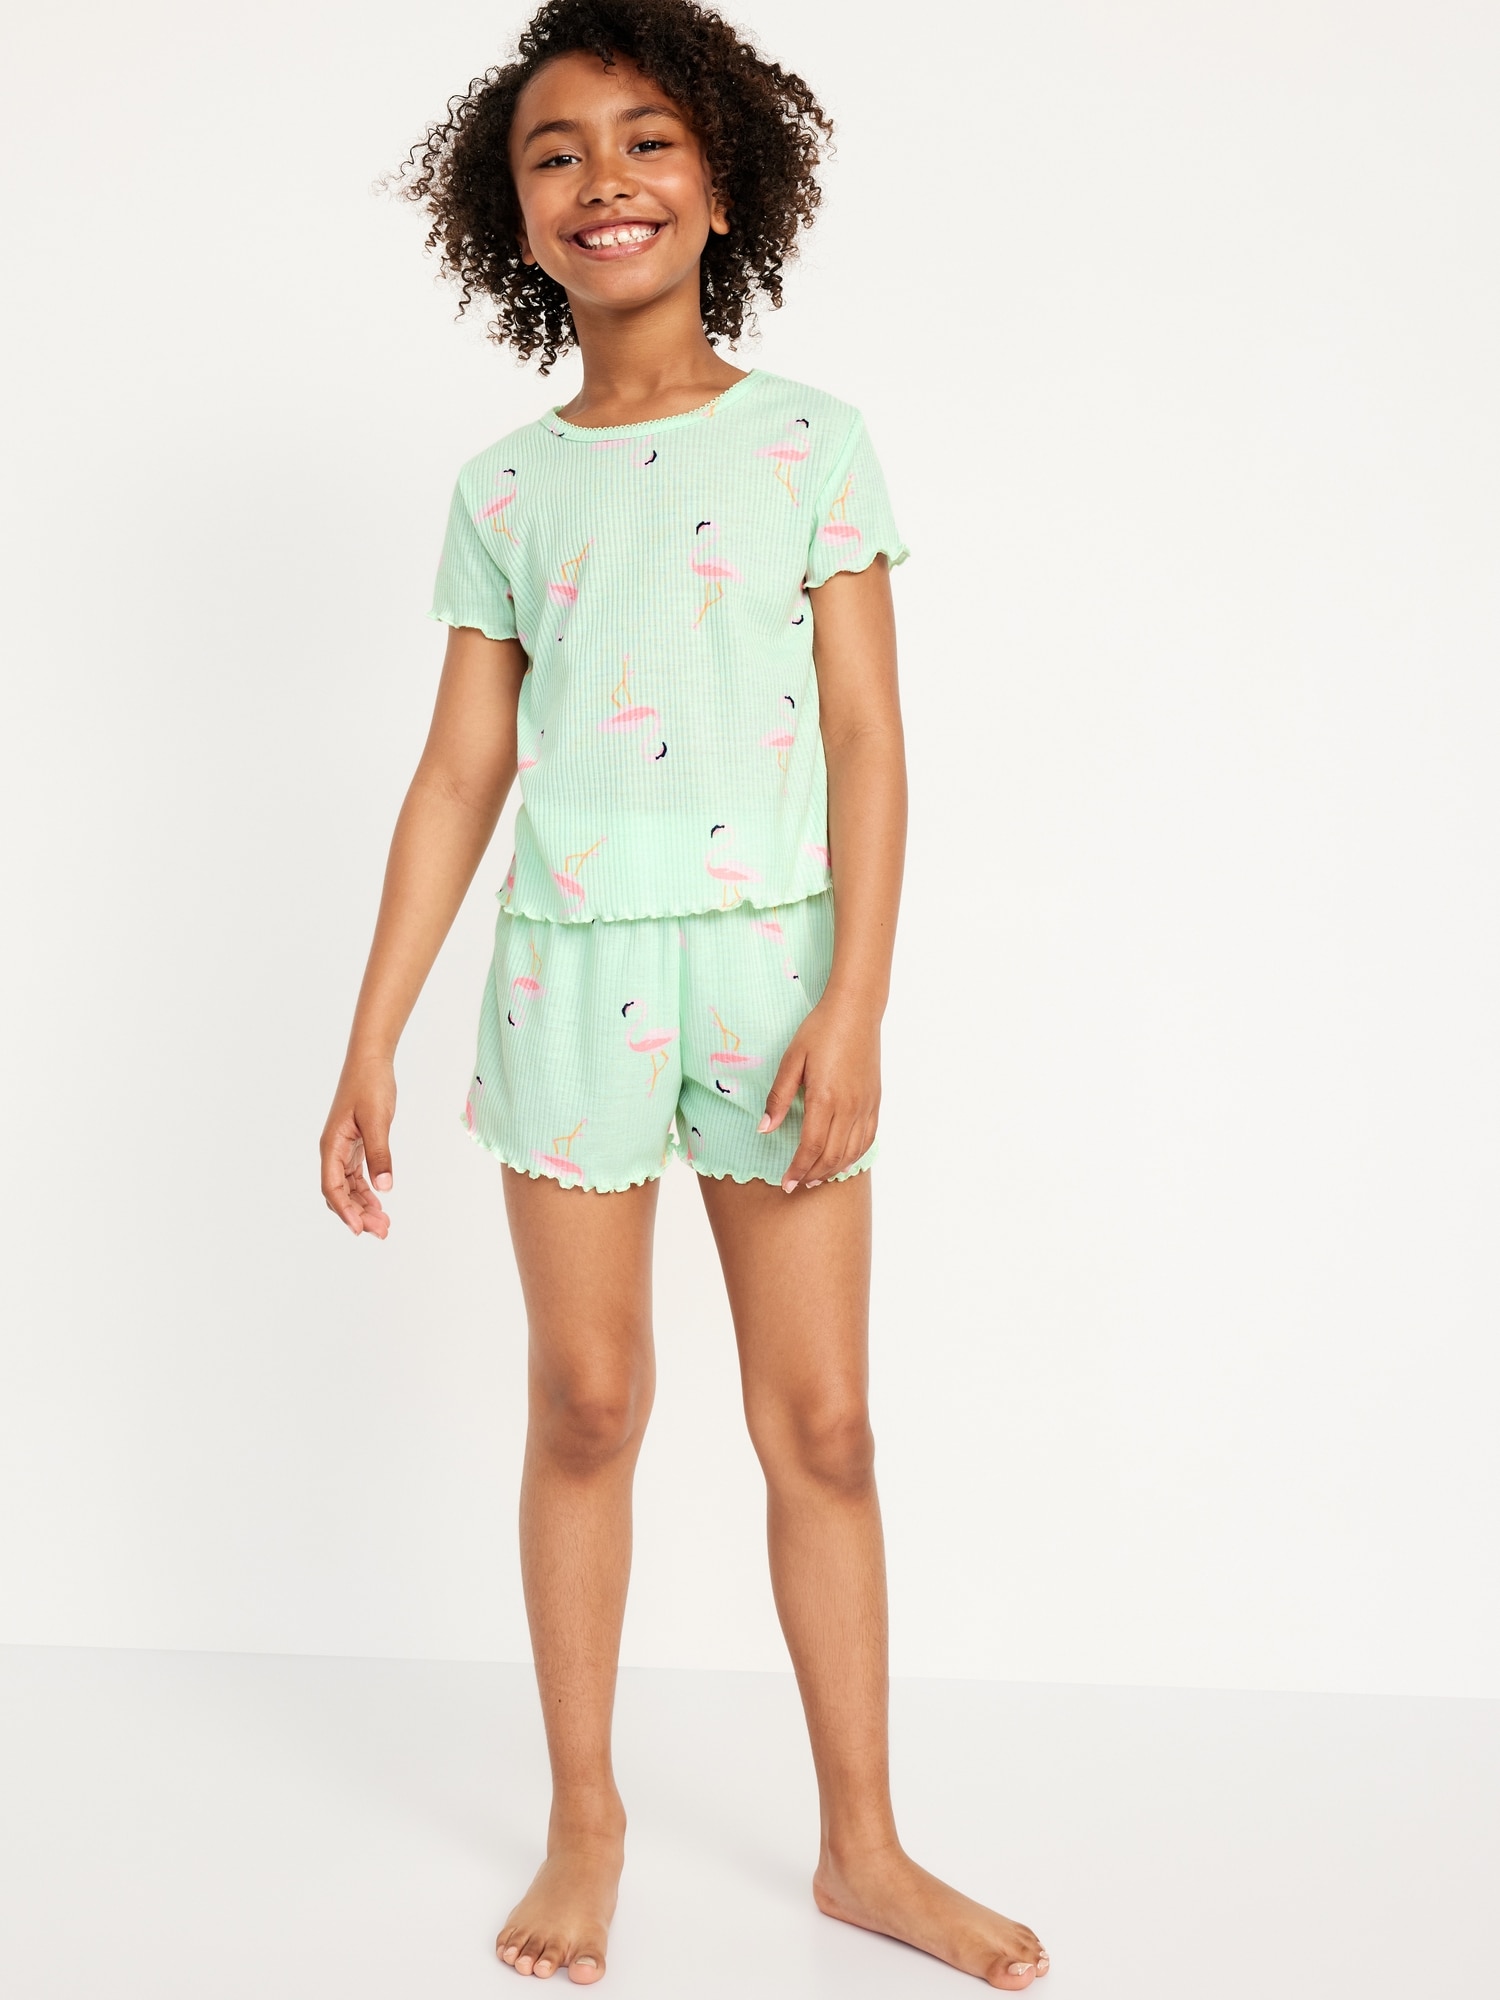 Printed Rib-Knit Pajama Top and horts et for Girls